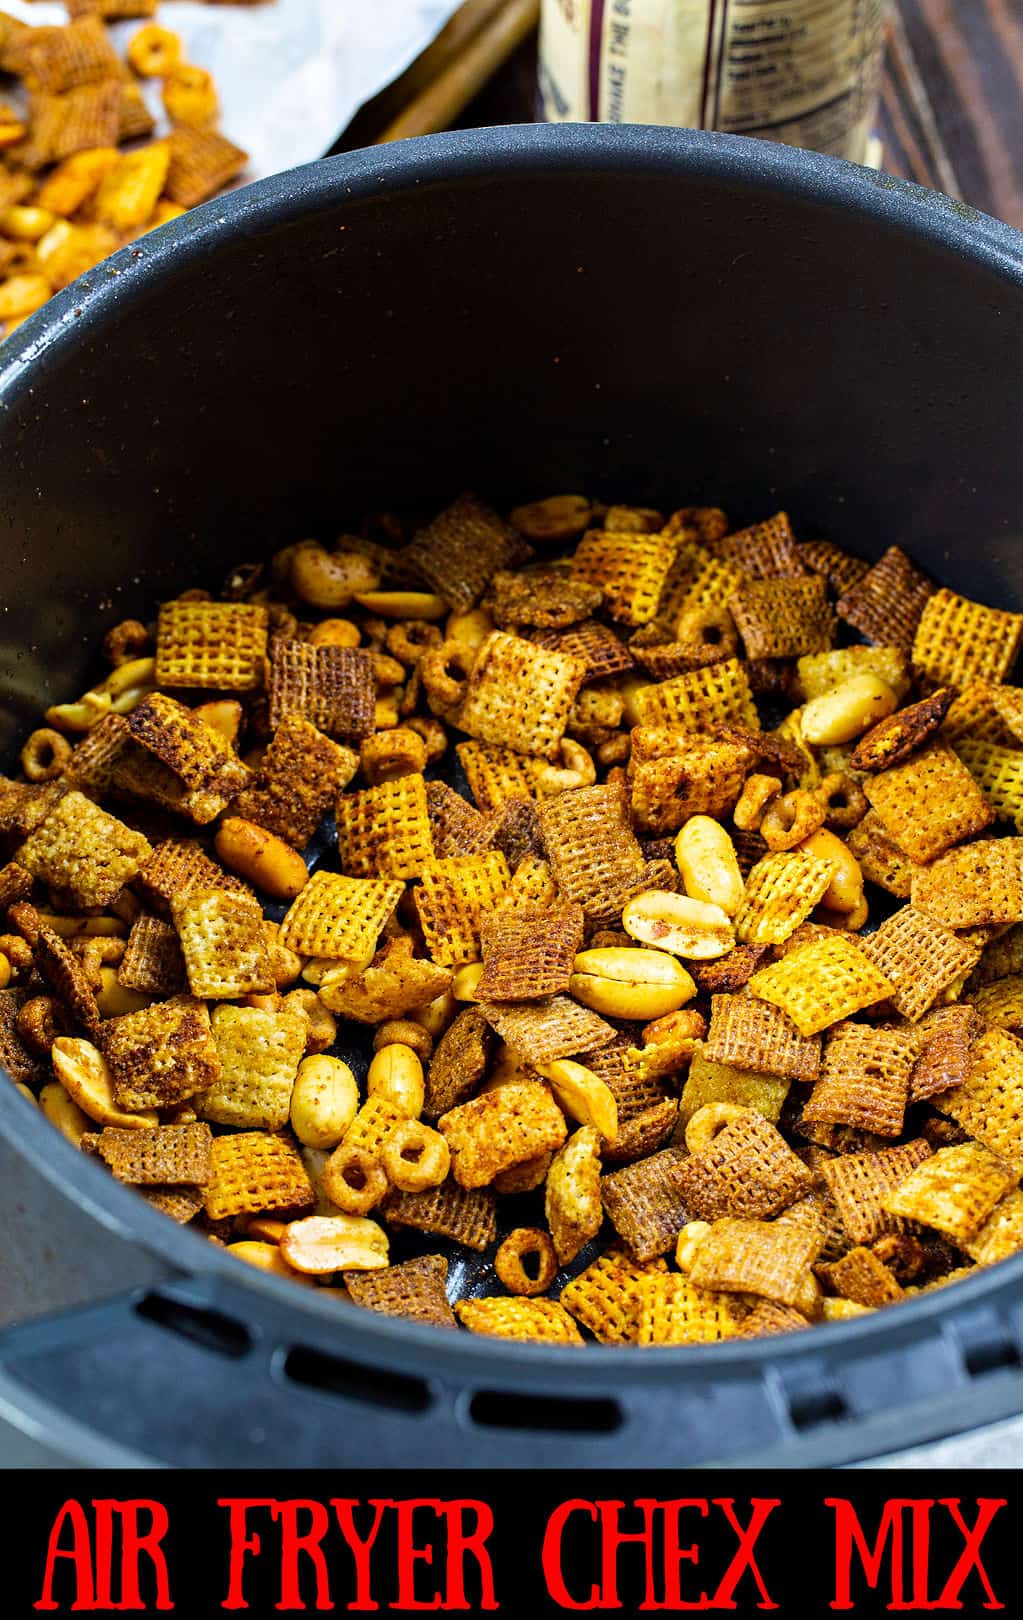 Chex Mix in air fryer basket.